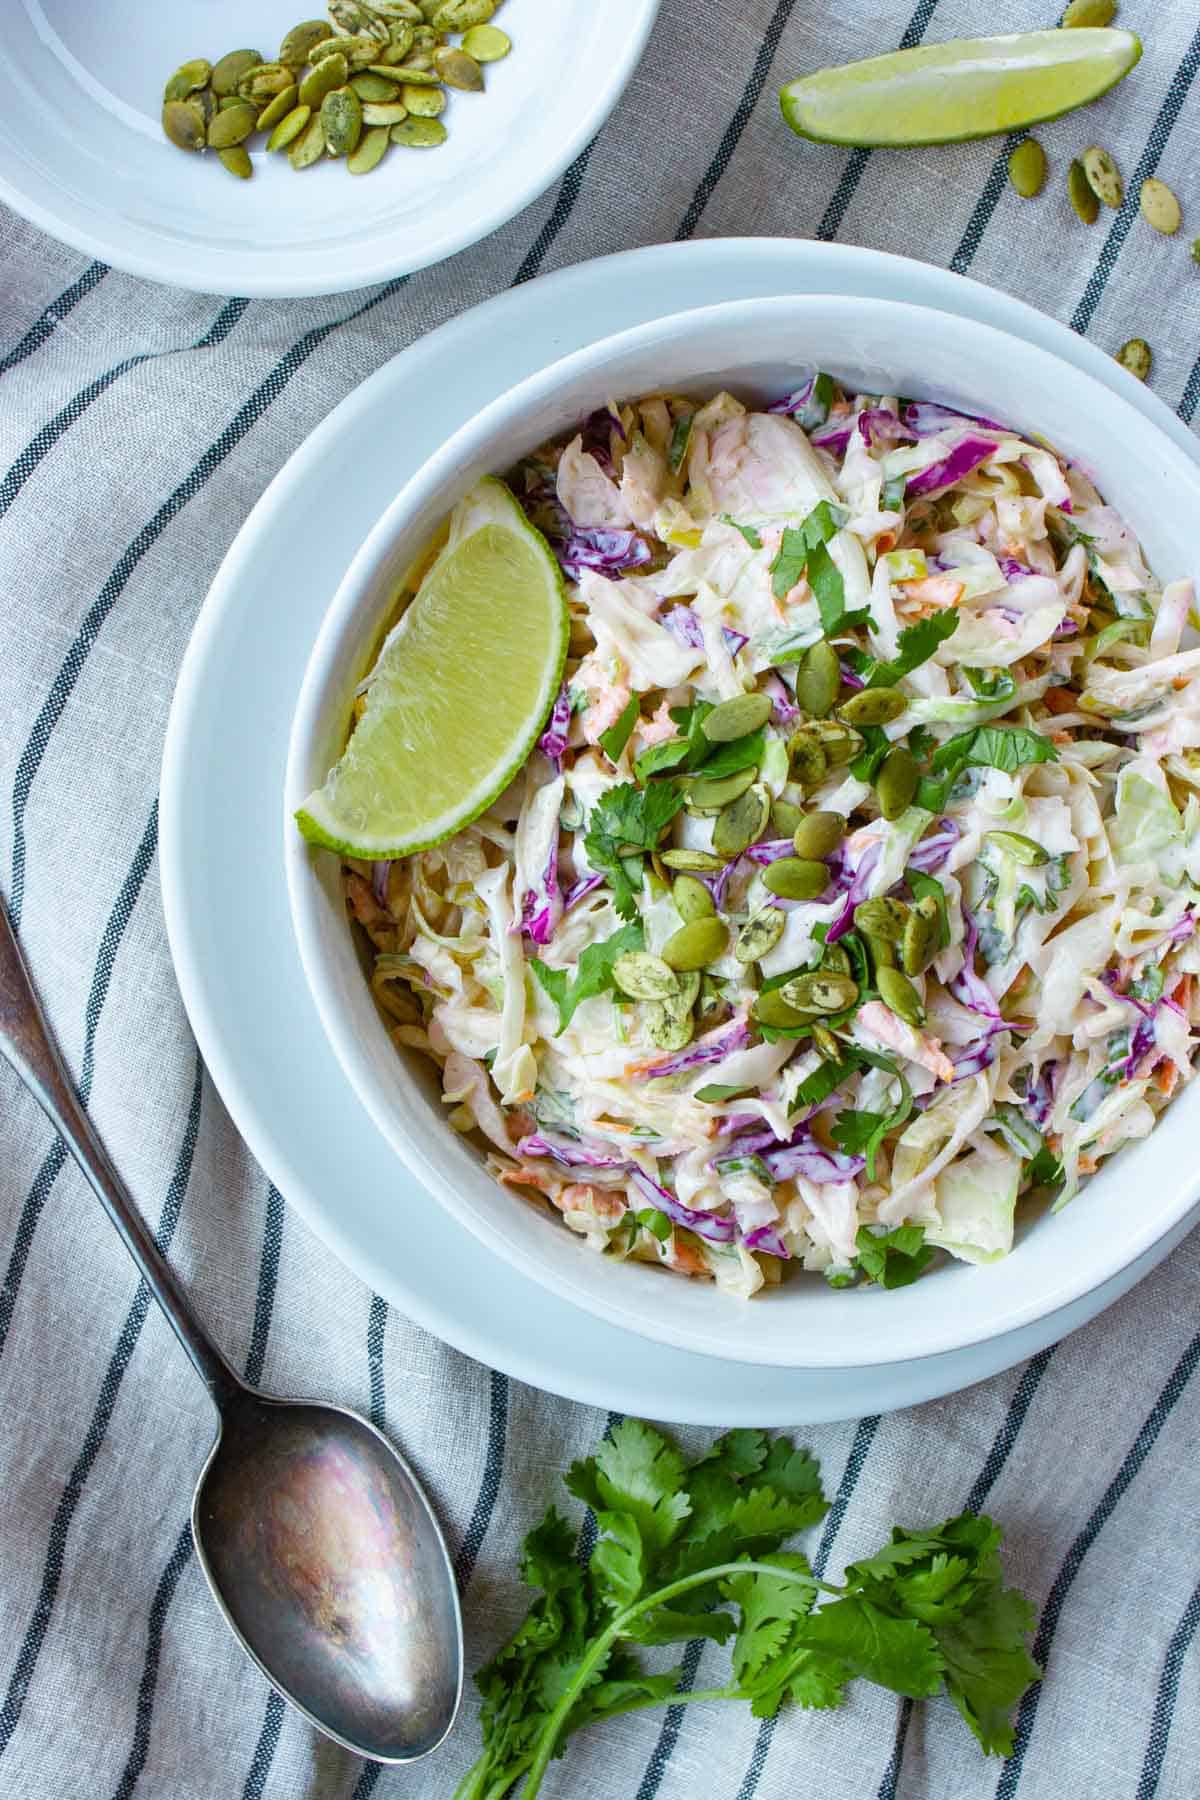 Coleslaw in white bowl with spoon and cilantro on a white and blue napkin.